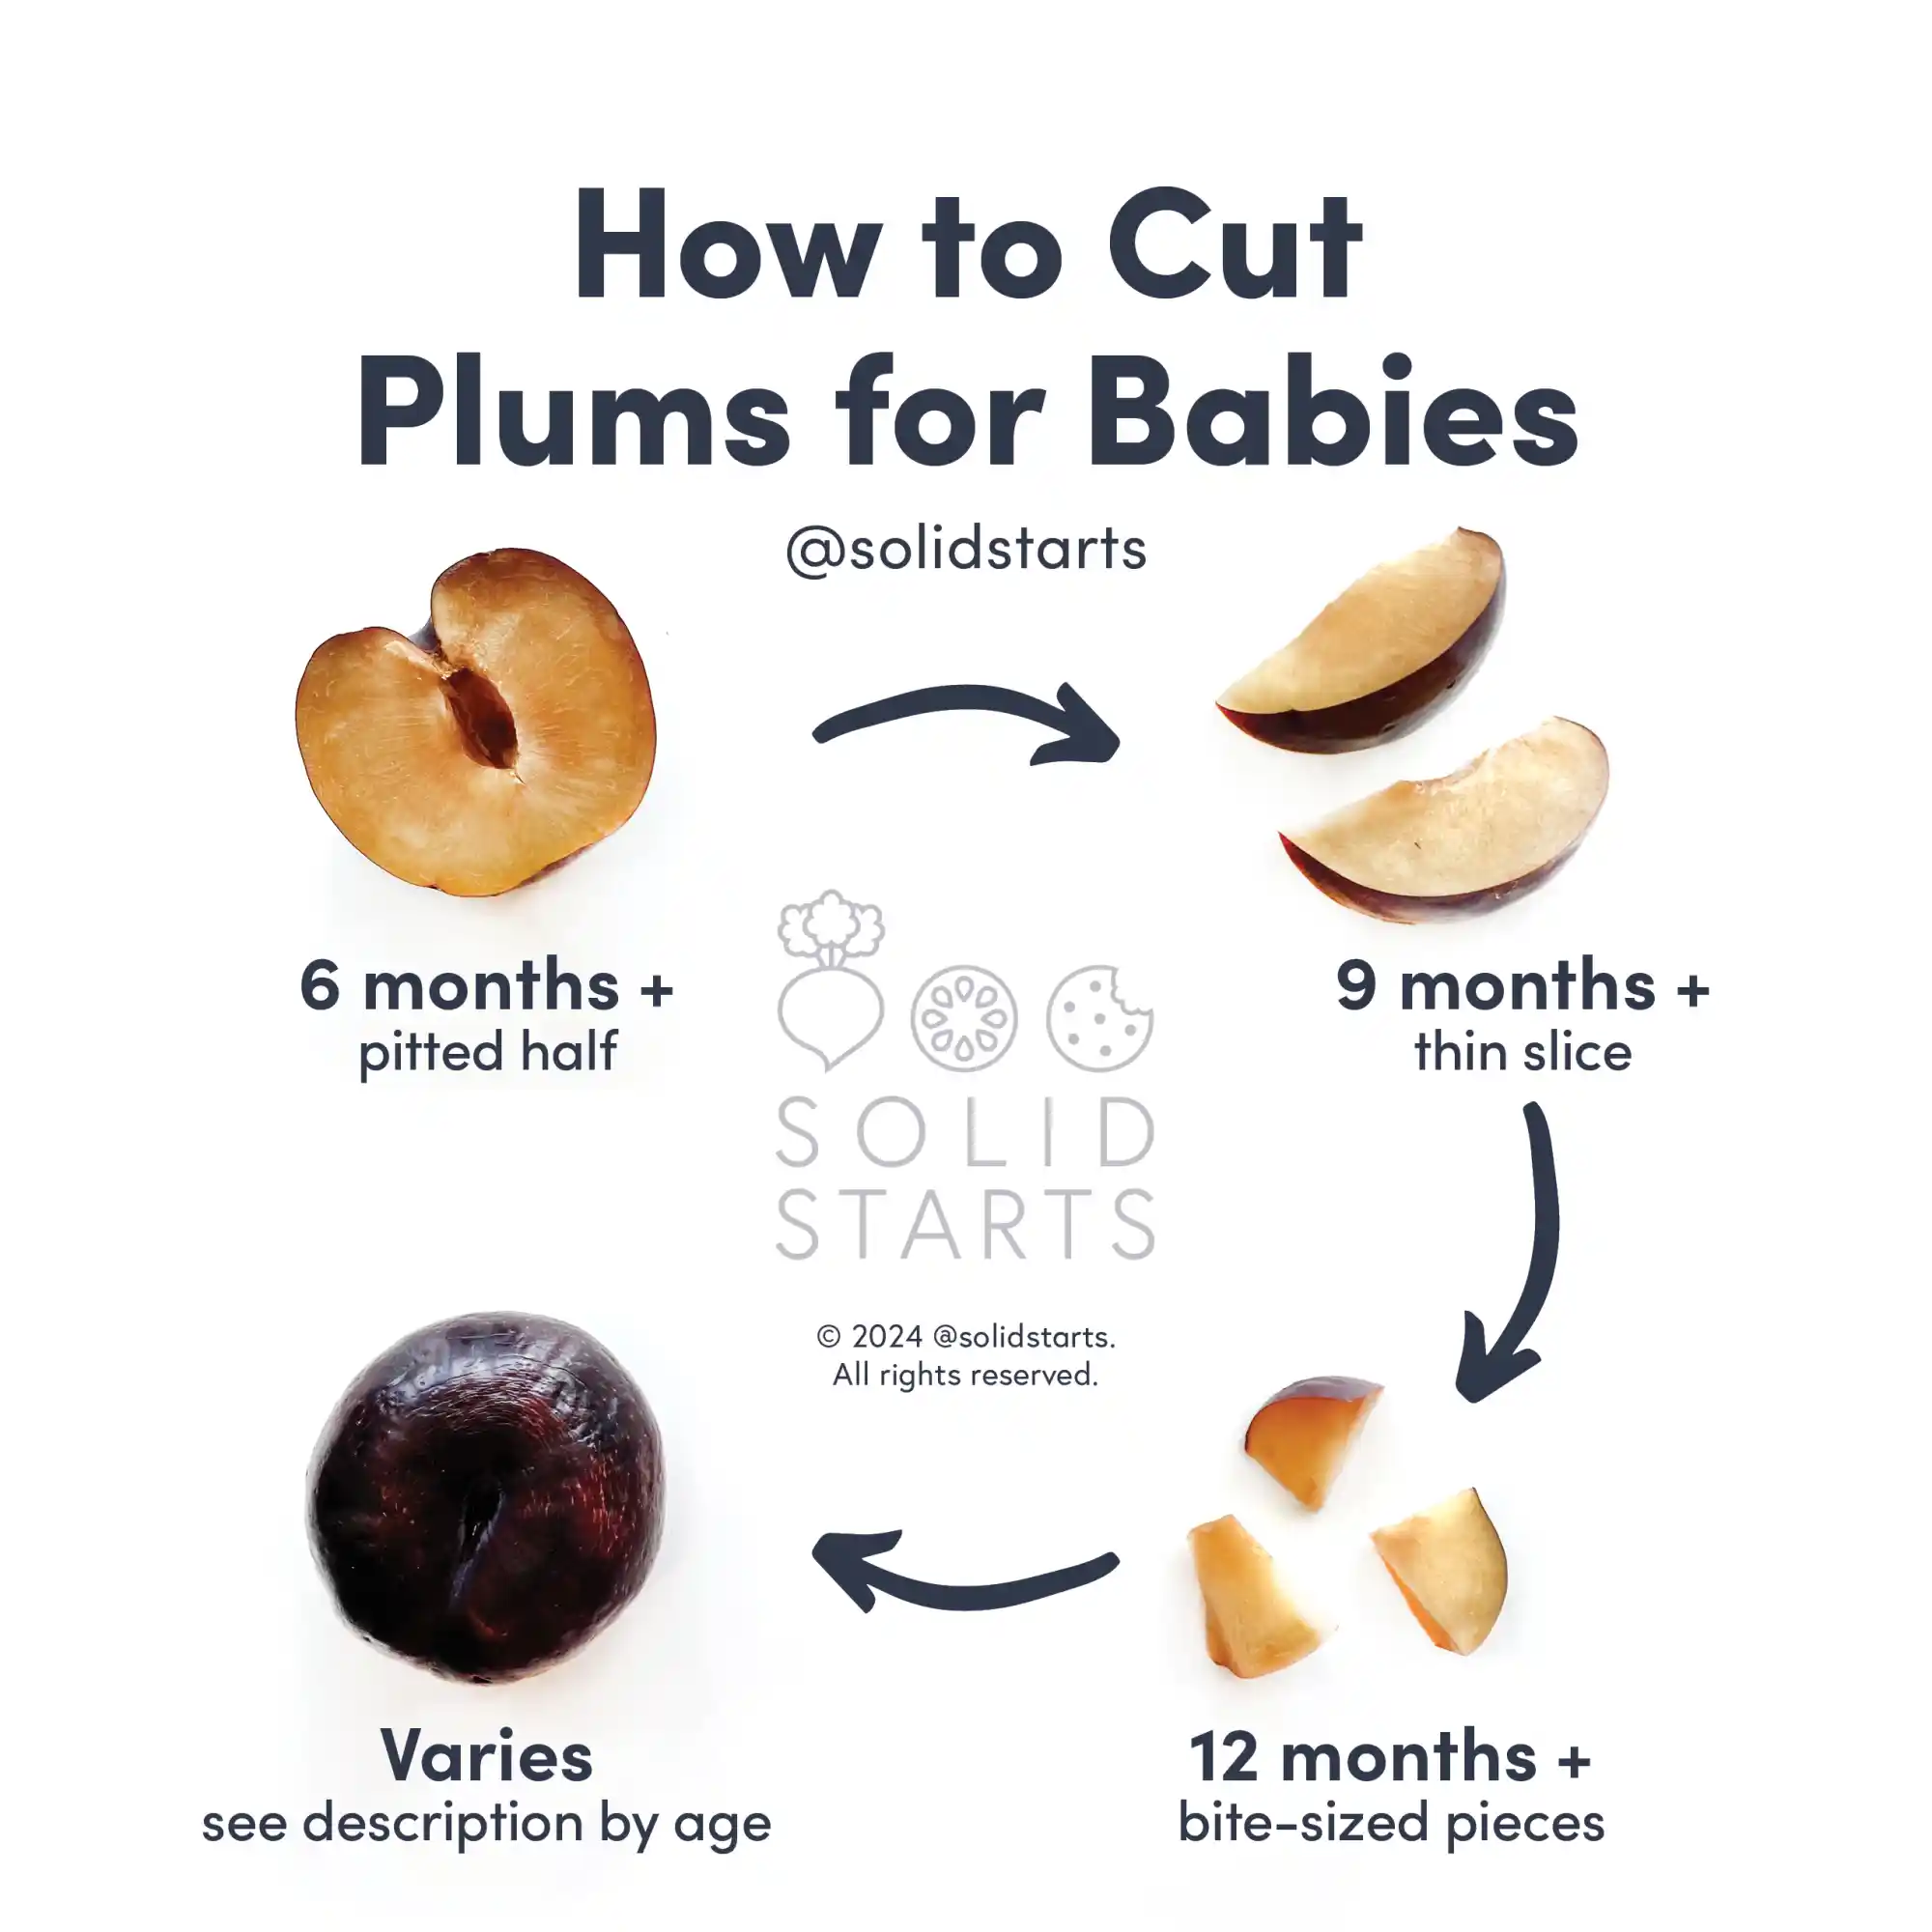 a Solid Starts infographic with the header How to Cut Plums for Babies: a halved plum (if ripe and very soft) with pit removed for babies 6 months+, thin slices of plum for 9 months+, bite size pieces for 12 months+, and Varies for whole plum